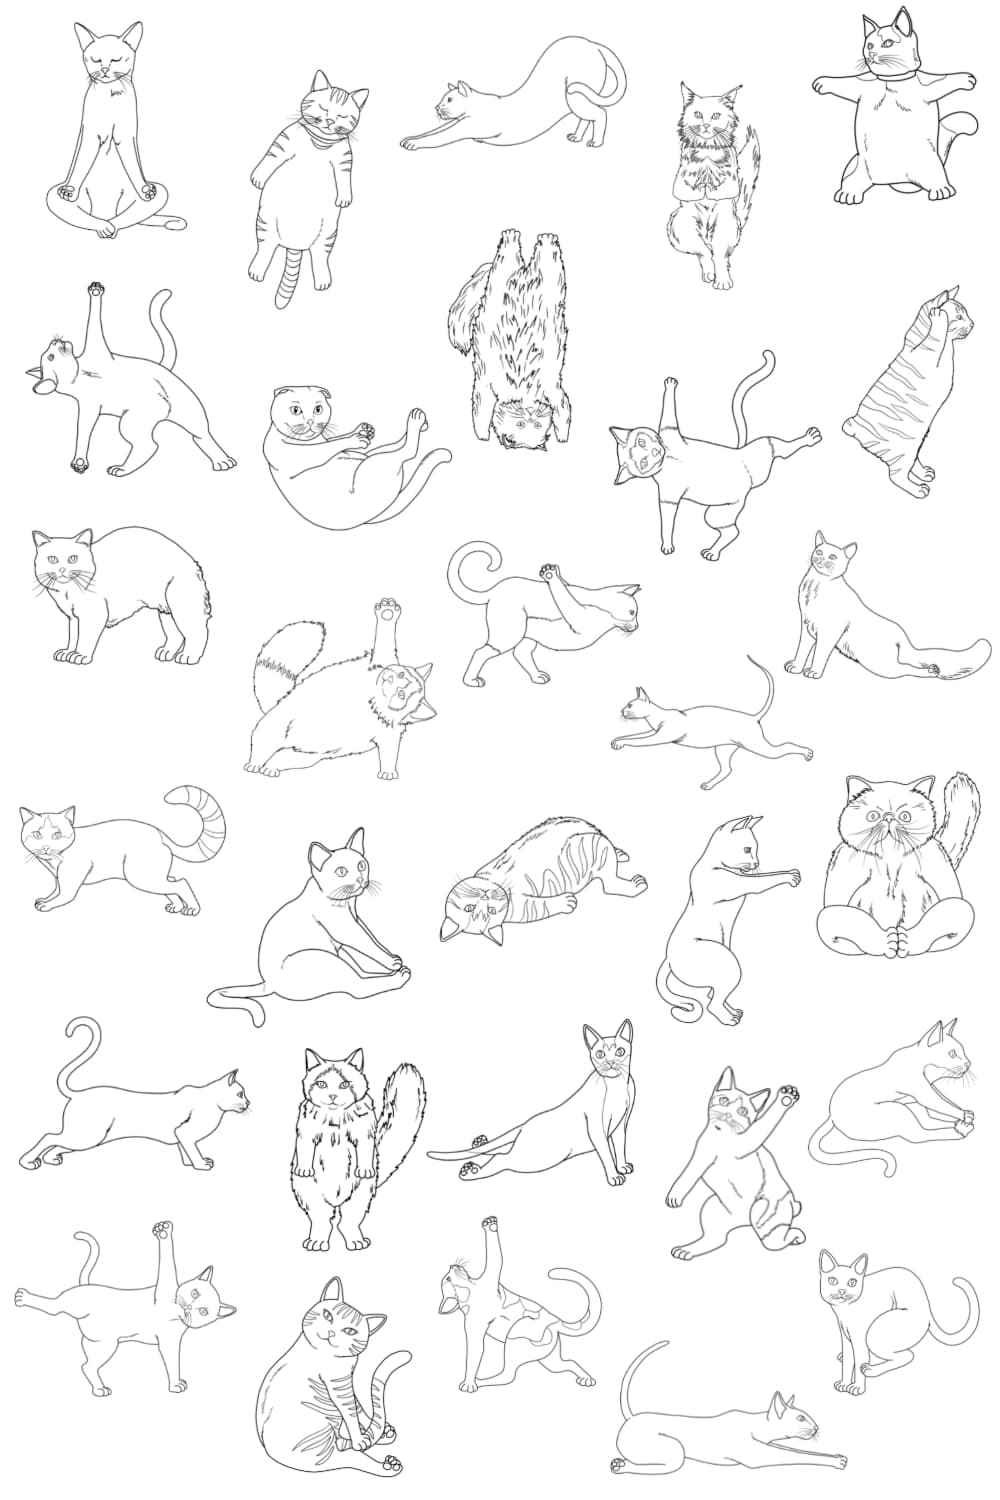 Yoga Cats Characters Black and white